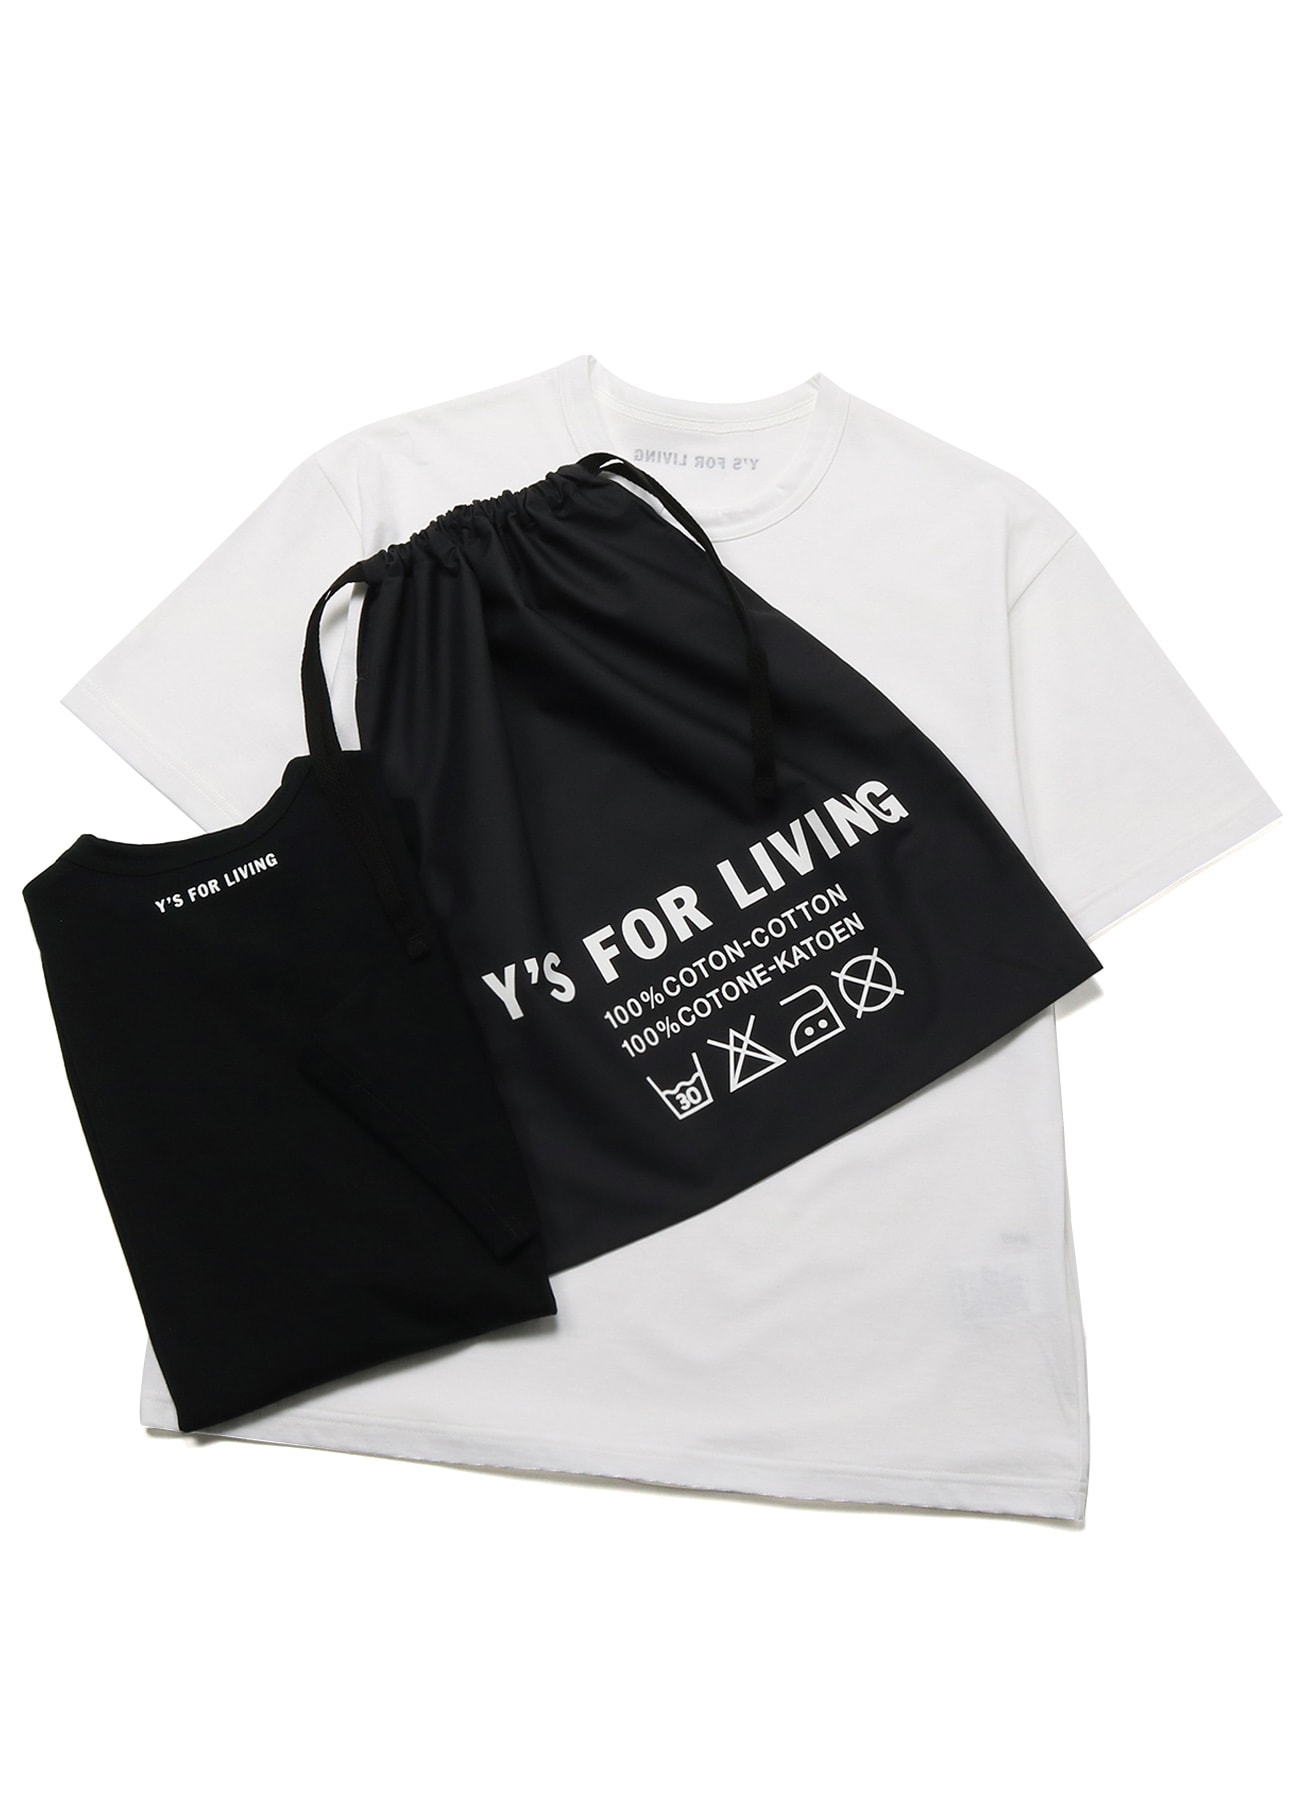 2PIECES 30/1 COTTON JERSEY T-SHIRTS(M White x Black): Y's for 